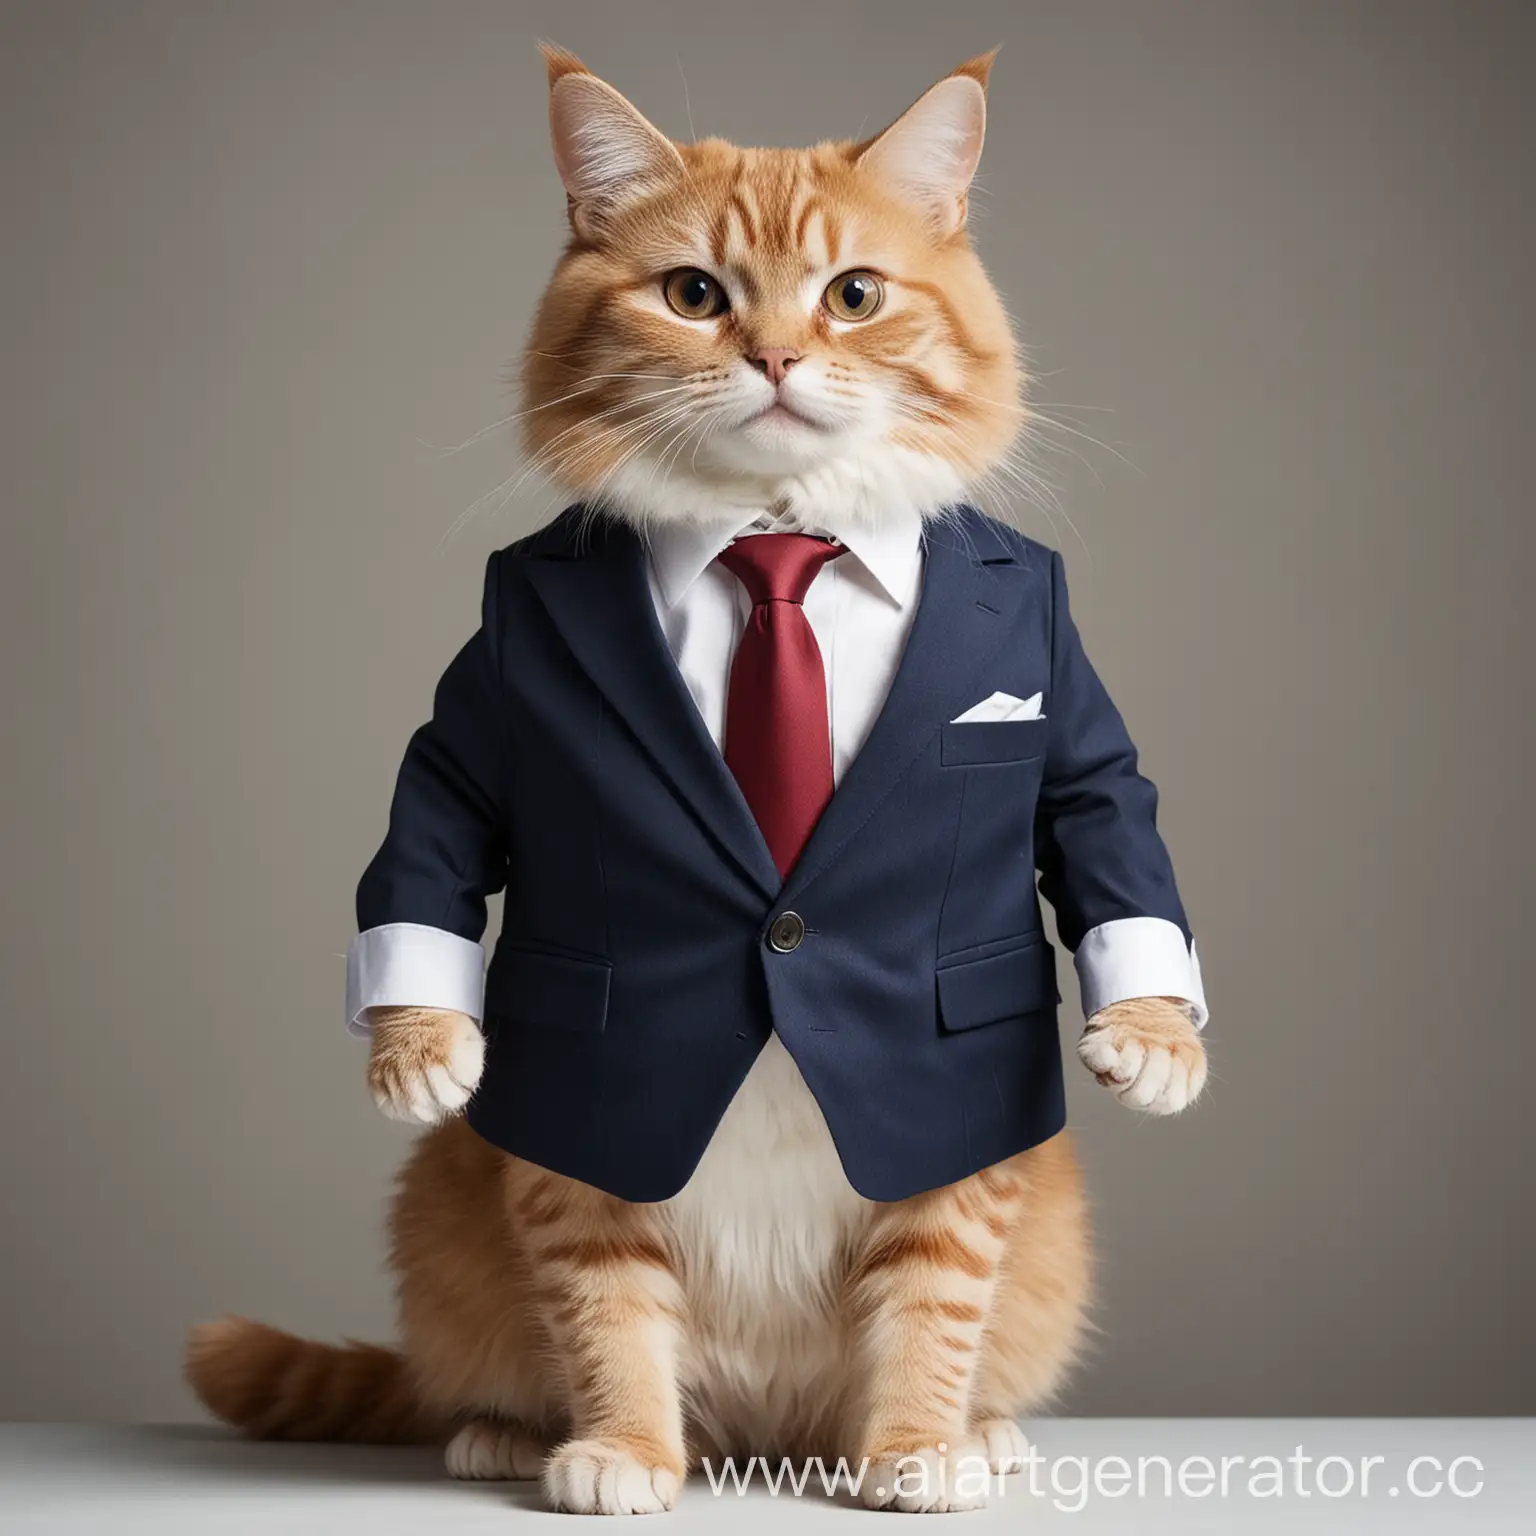 Cat-in-Business-Suit-Exuding-Professionalism-and-Charm